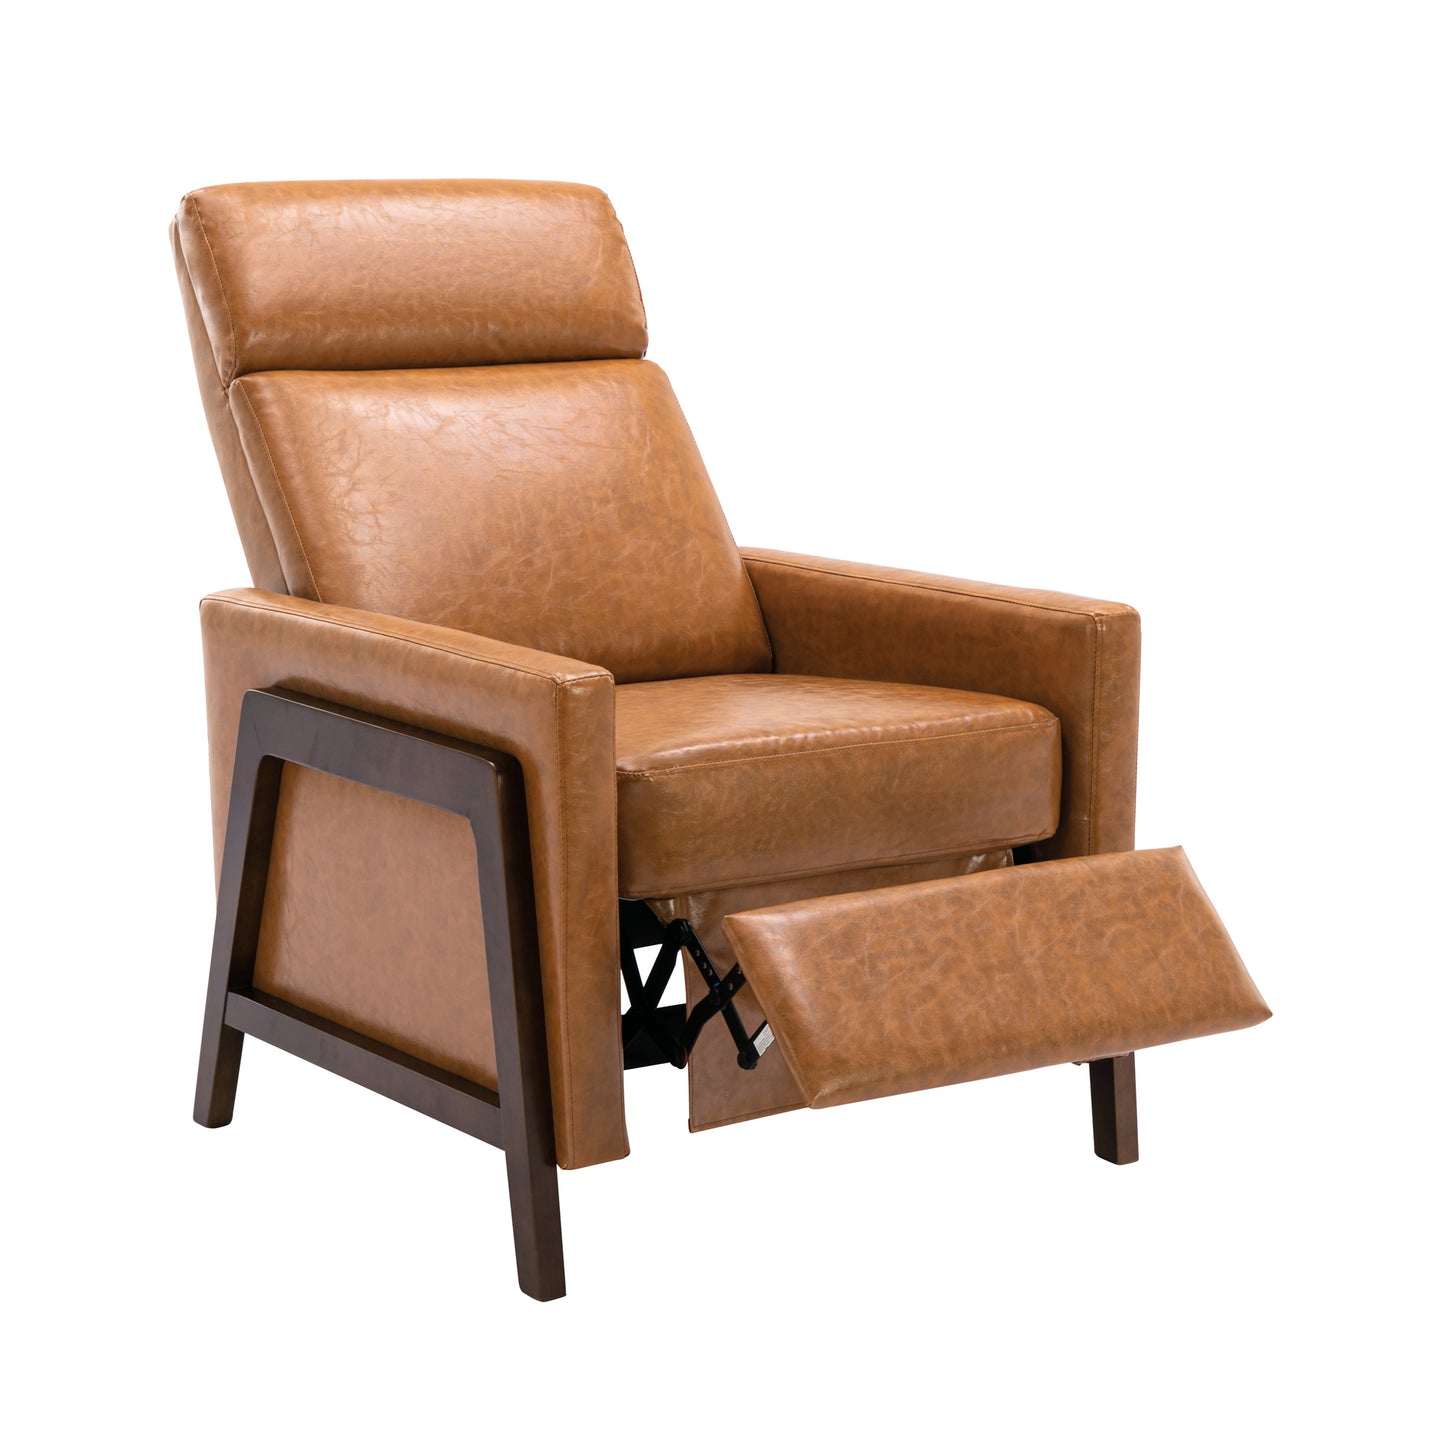 Camelot, Solid Wood Leather Recliner